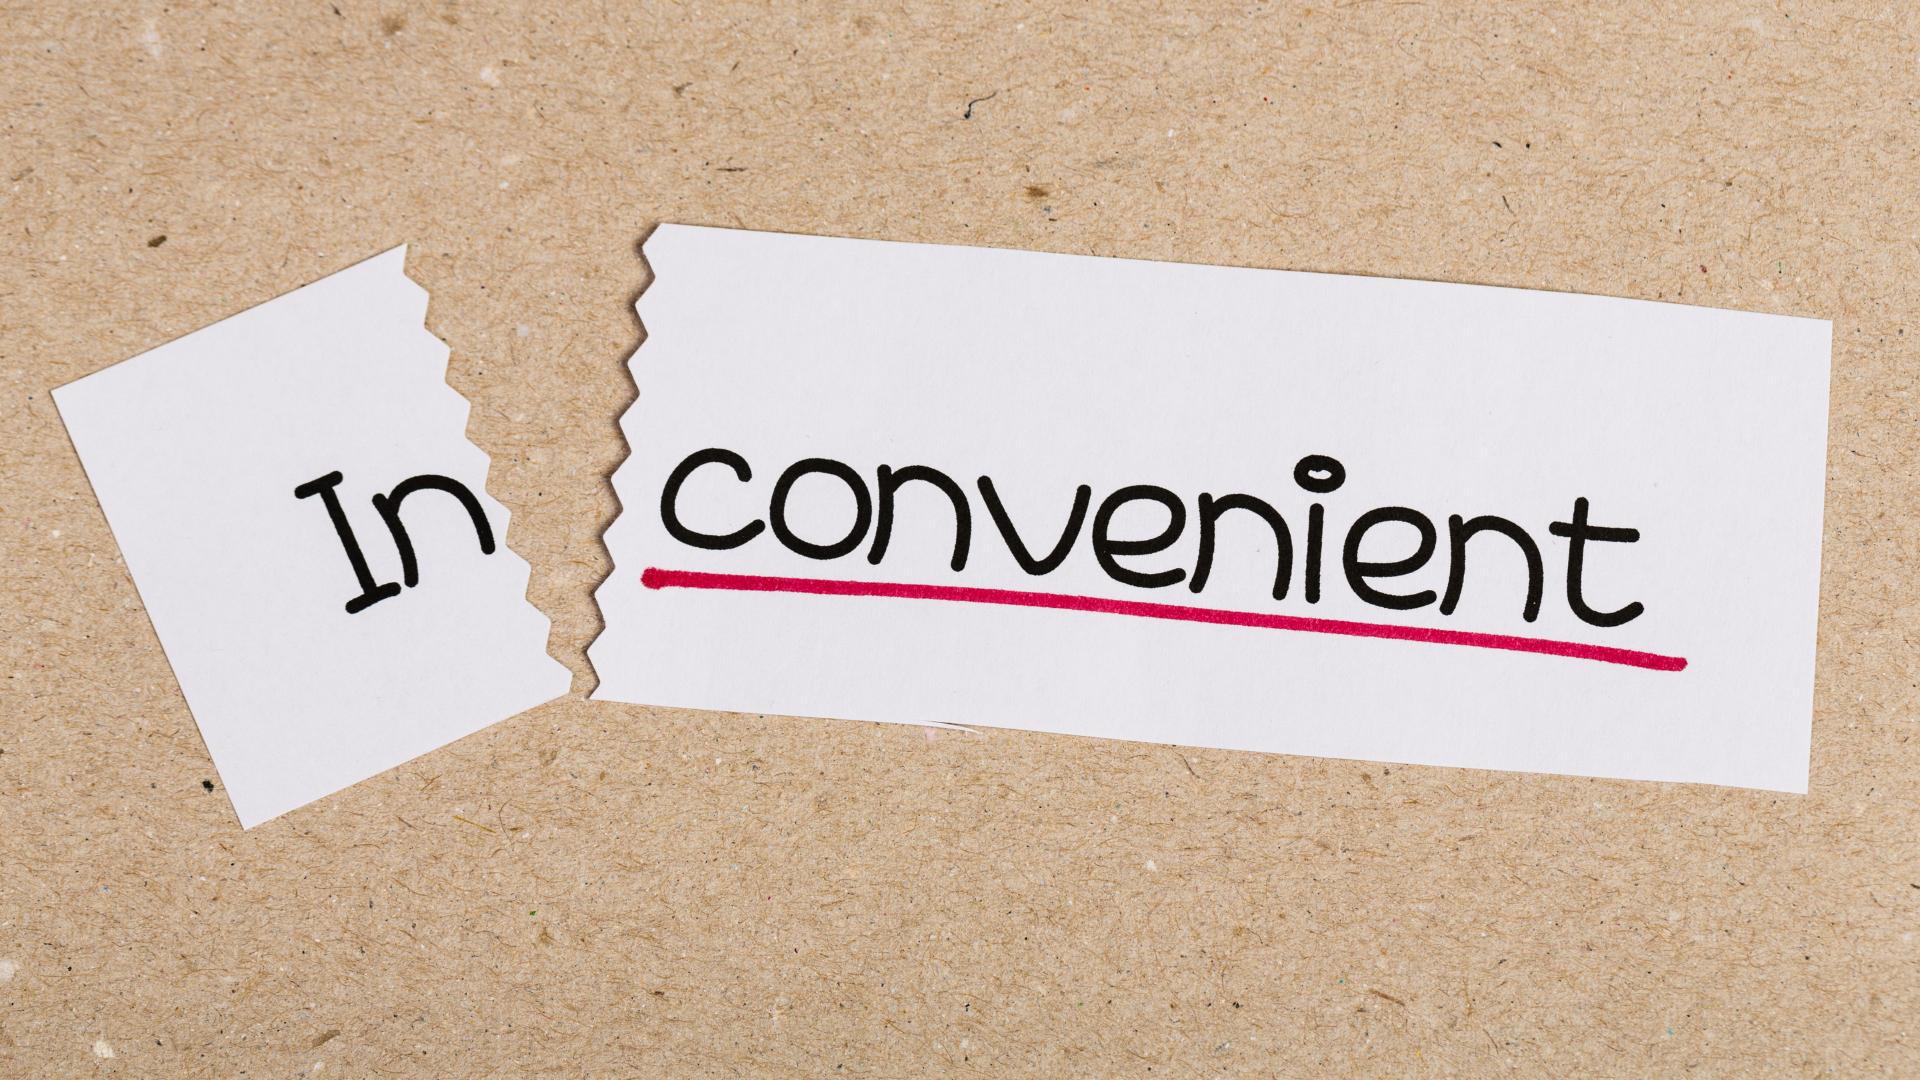 Word inconvenient written on paper that has been torn to show the word convenient only